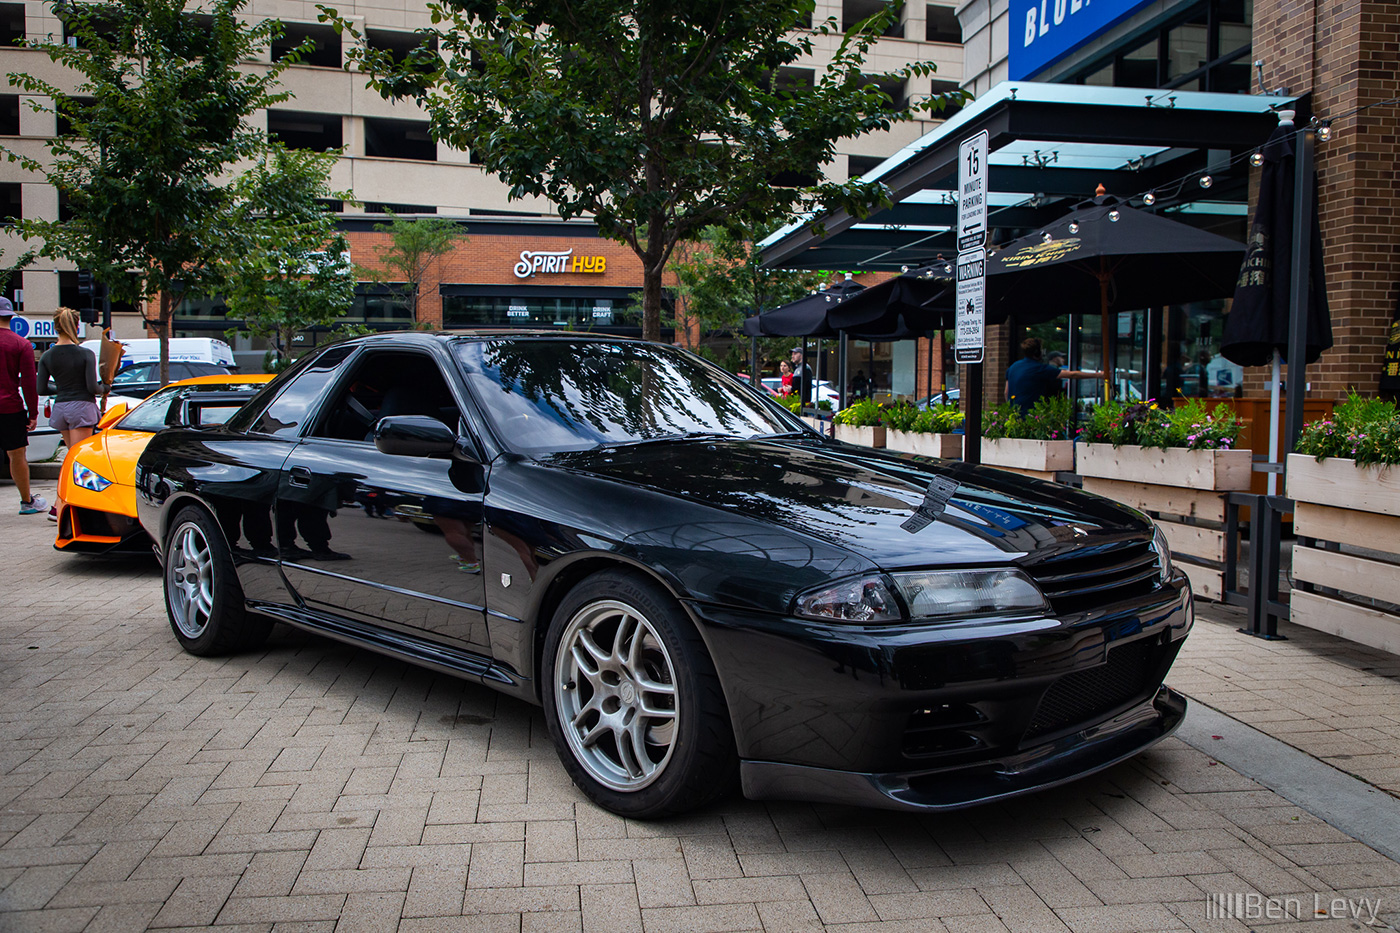 Black R32 Nissan Skyline GT-R at Lincoln Common in Chicago